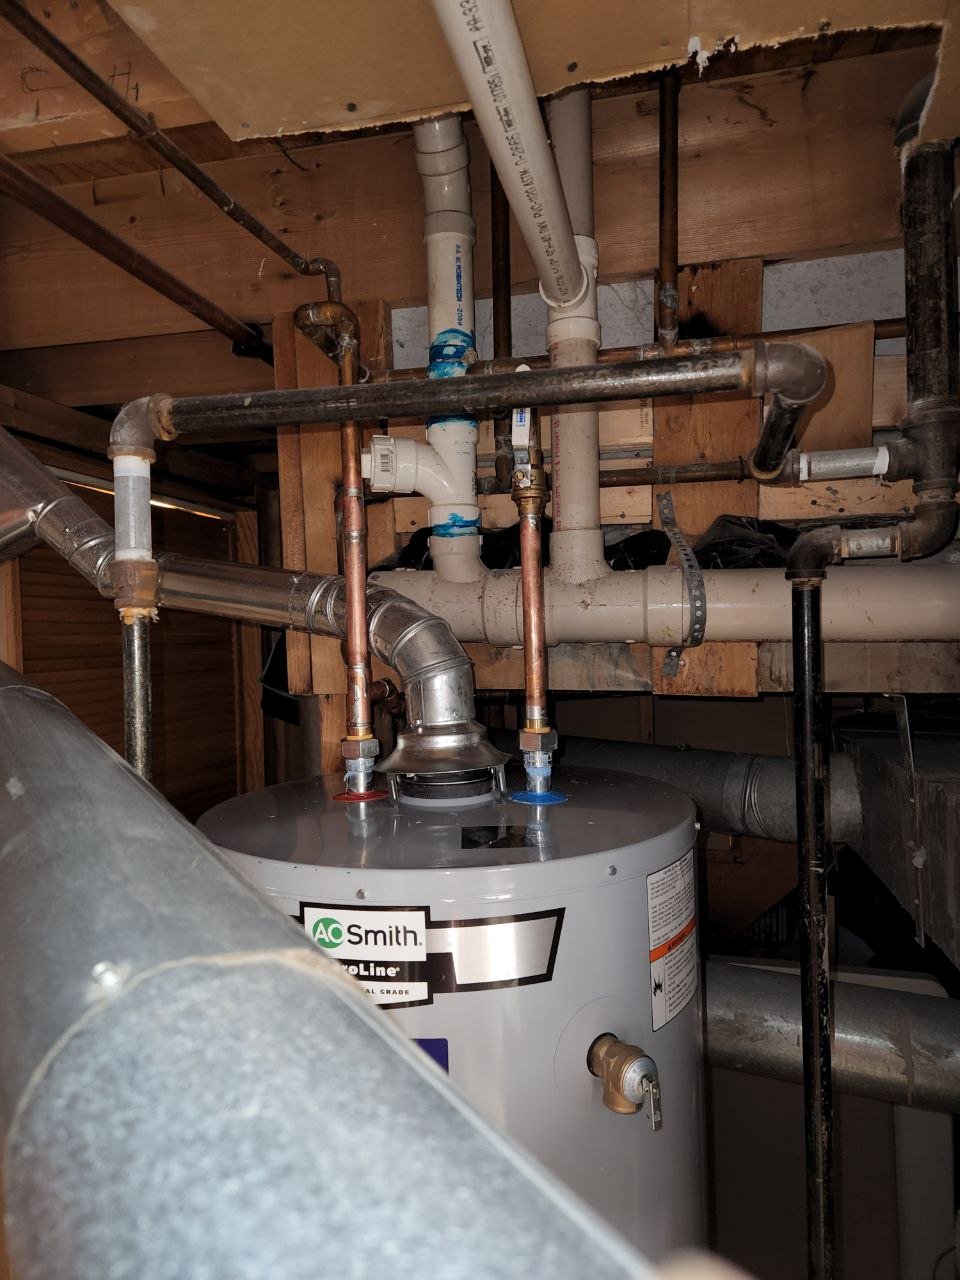 Stand Alone Water Heaters - PIPELINES, Inc.